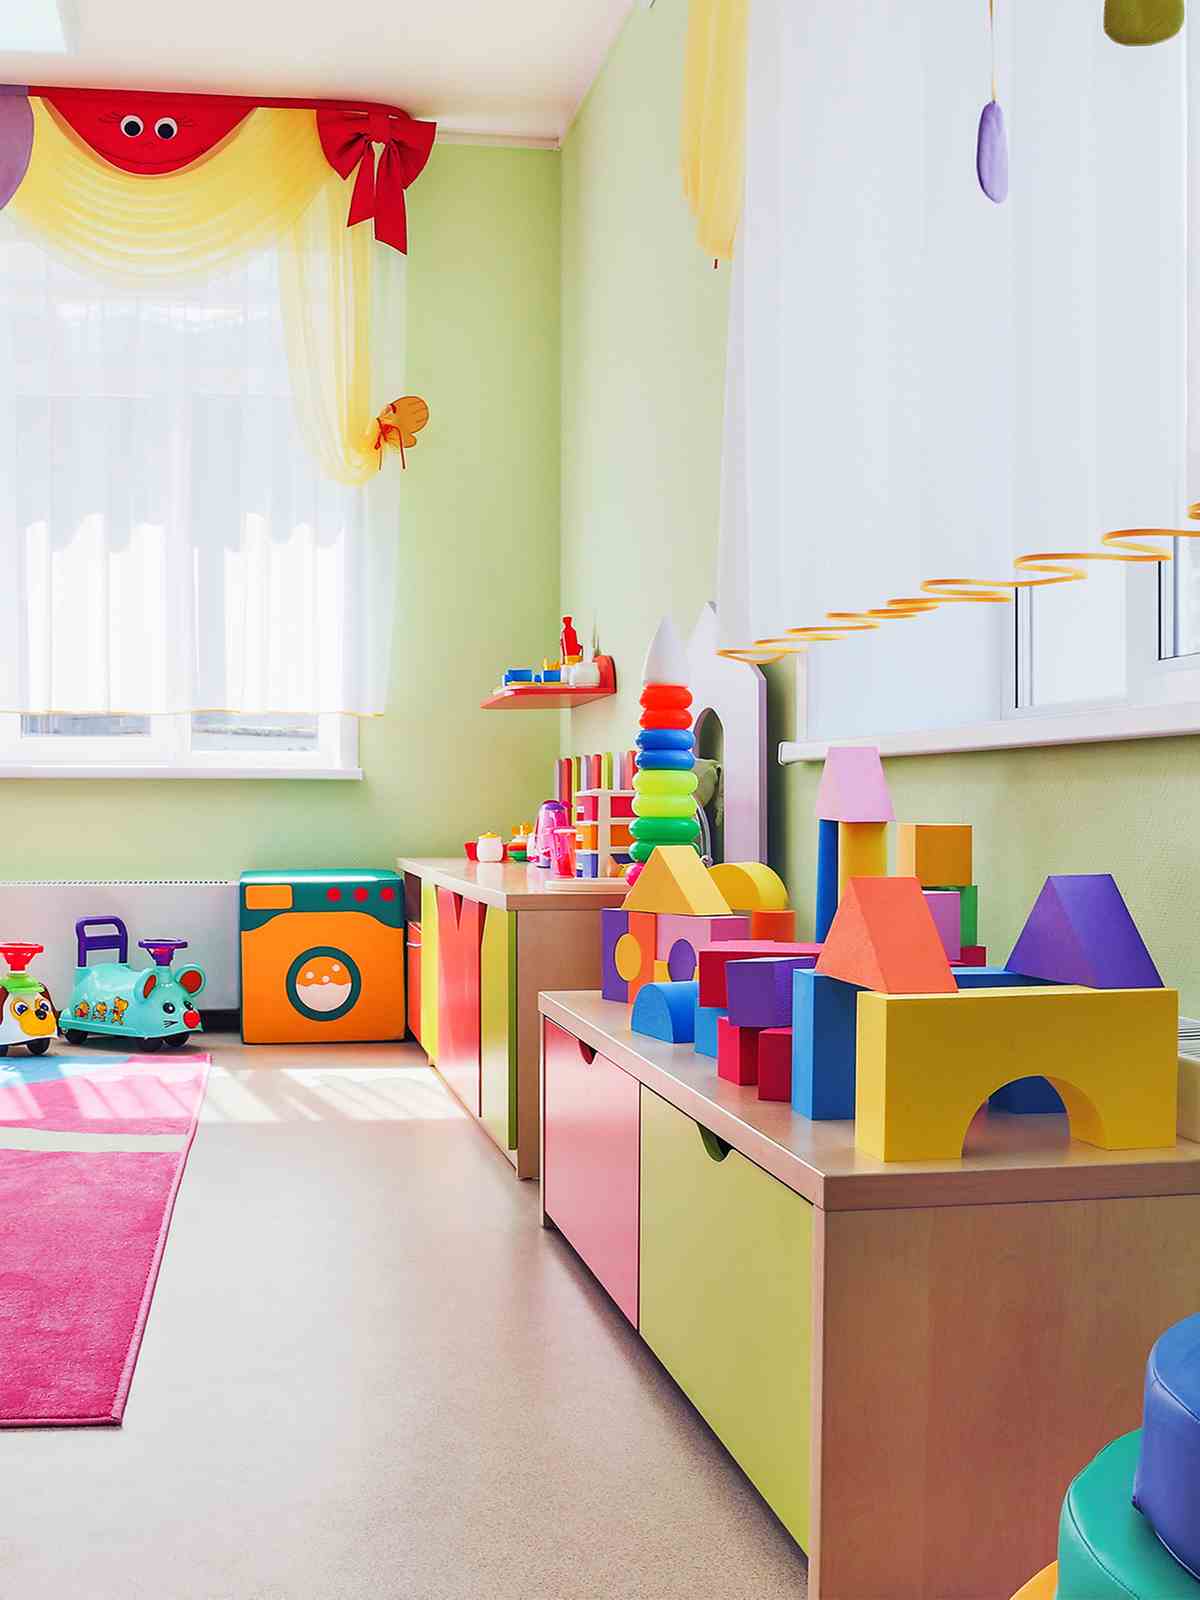 Mormax Products for Daycare Facilities